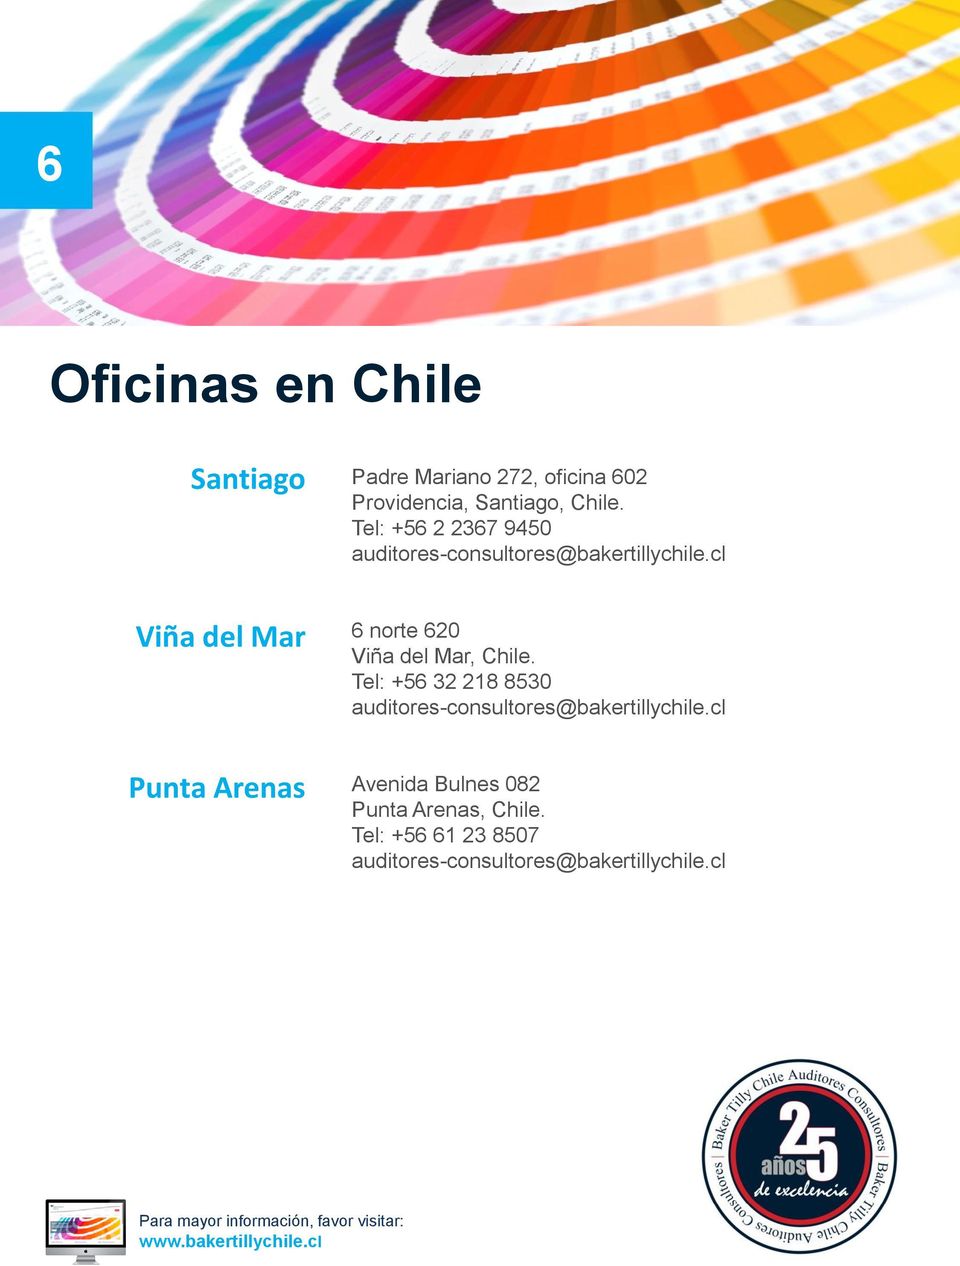 Tel: +56 32 218 8530 auditores-consultores@bakertillychile.